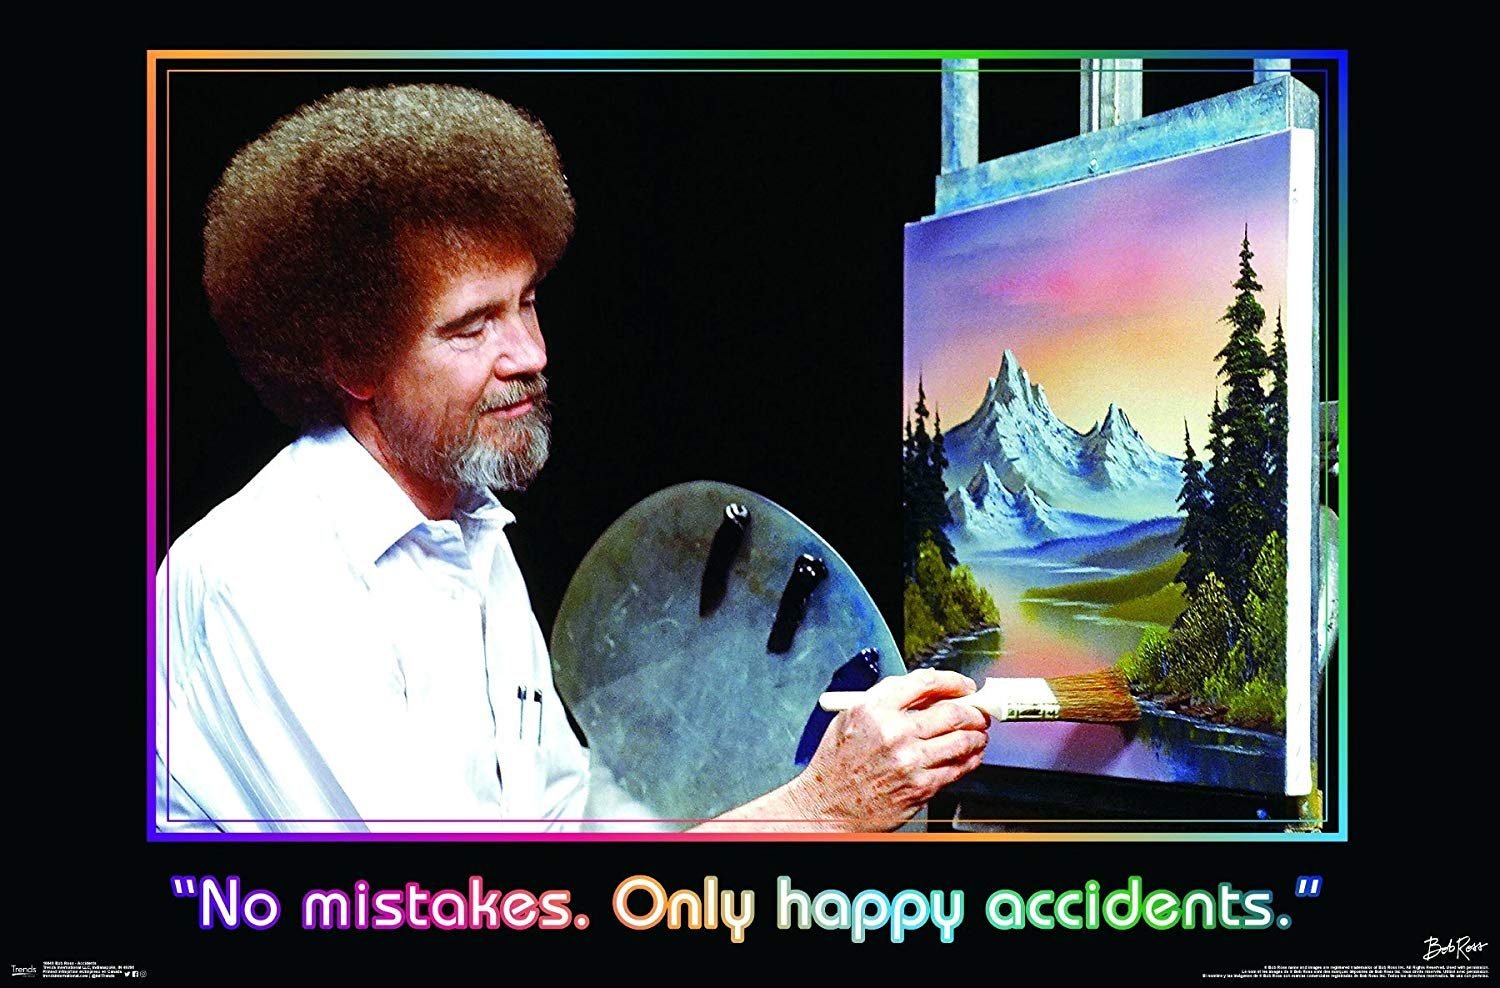 Why Bob Ross Made 3 Copies of His Paintings | Reader's Digest